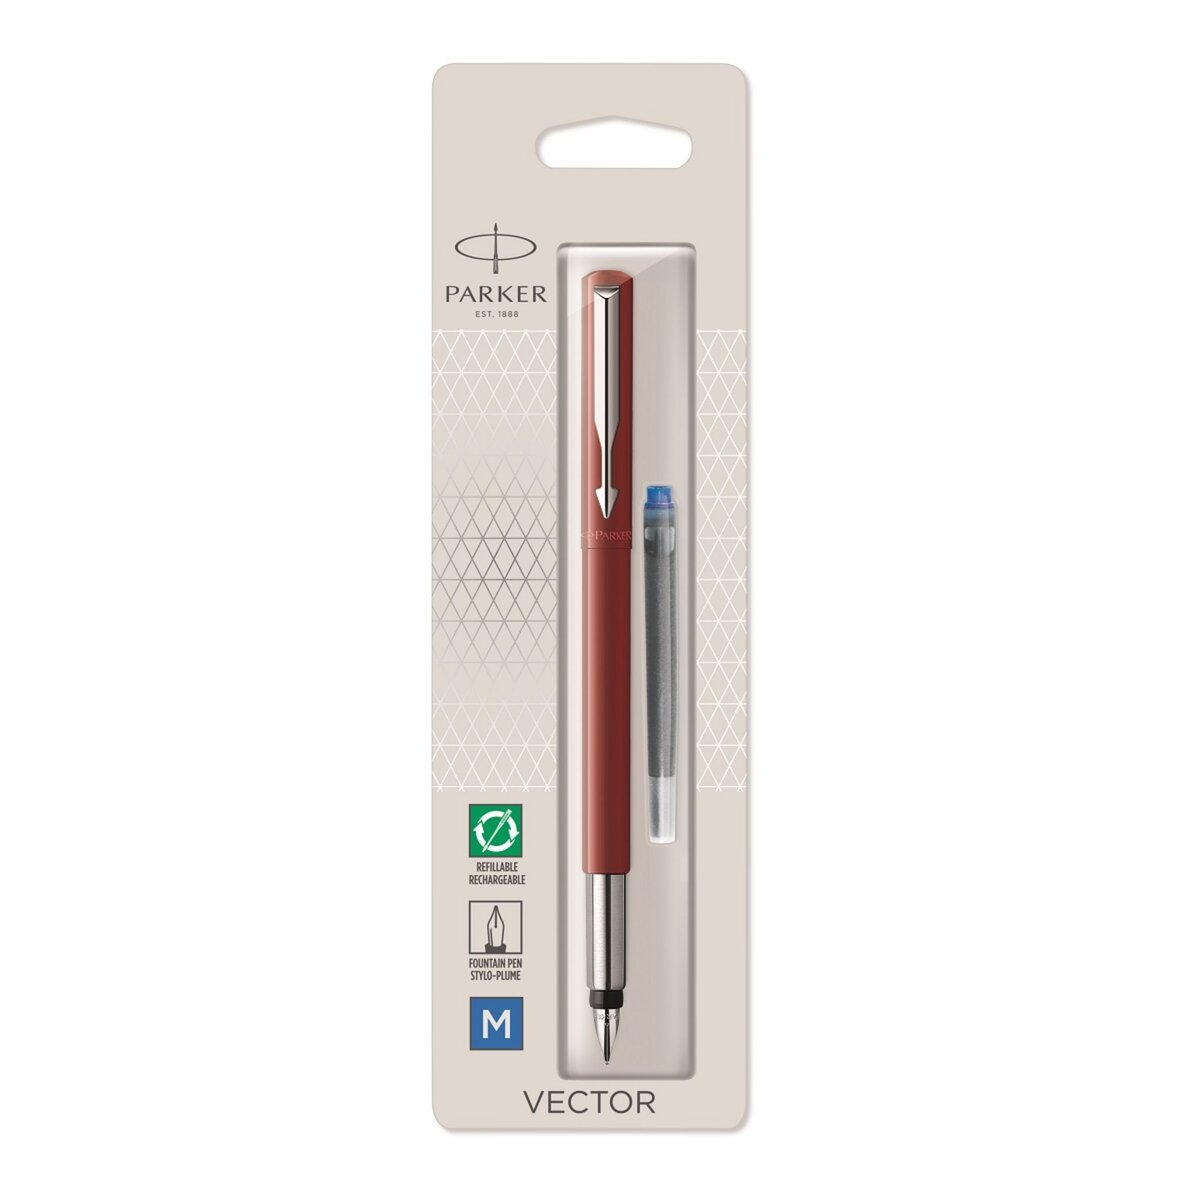 PARKER Stylo plume rechargeable pointe moyenne Vector + cartouche rouge